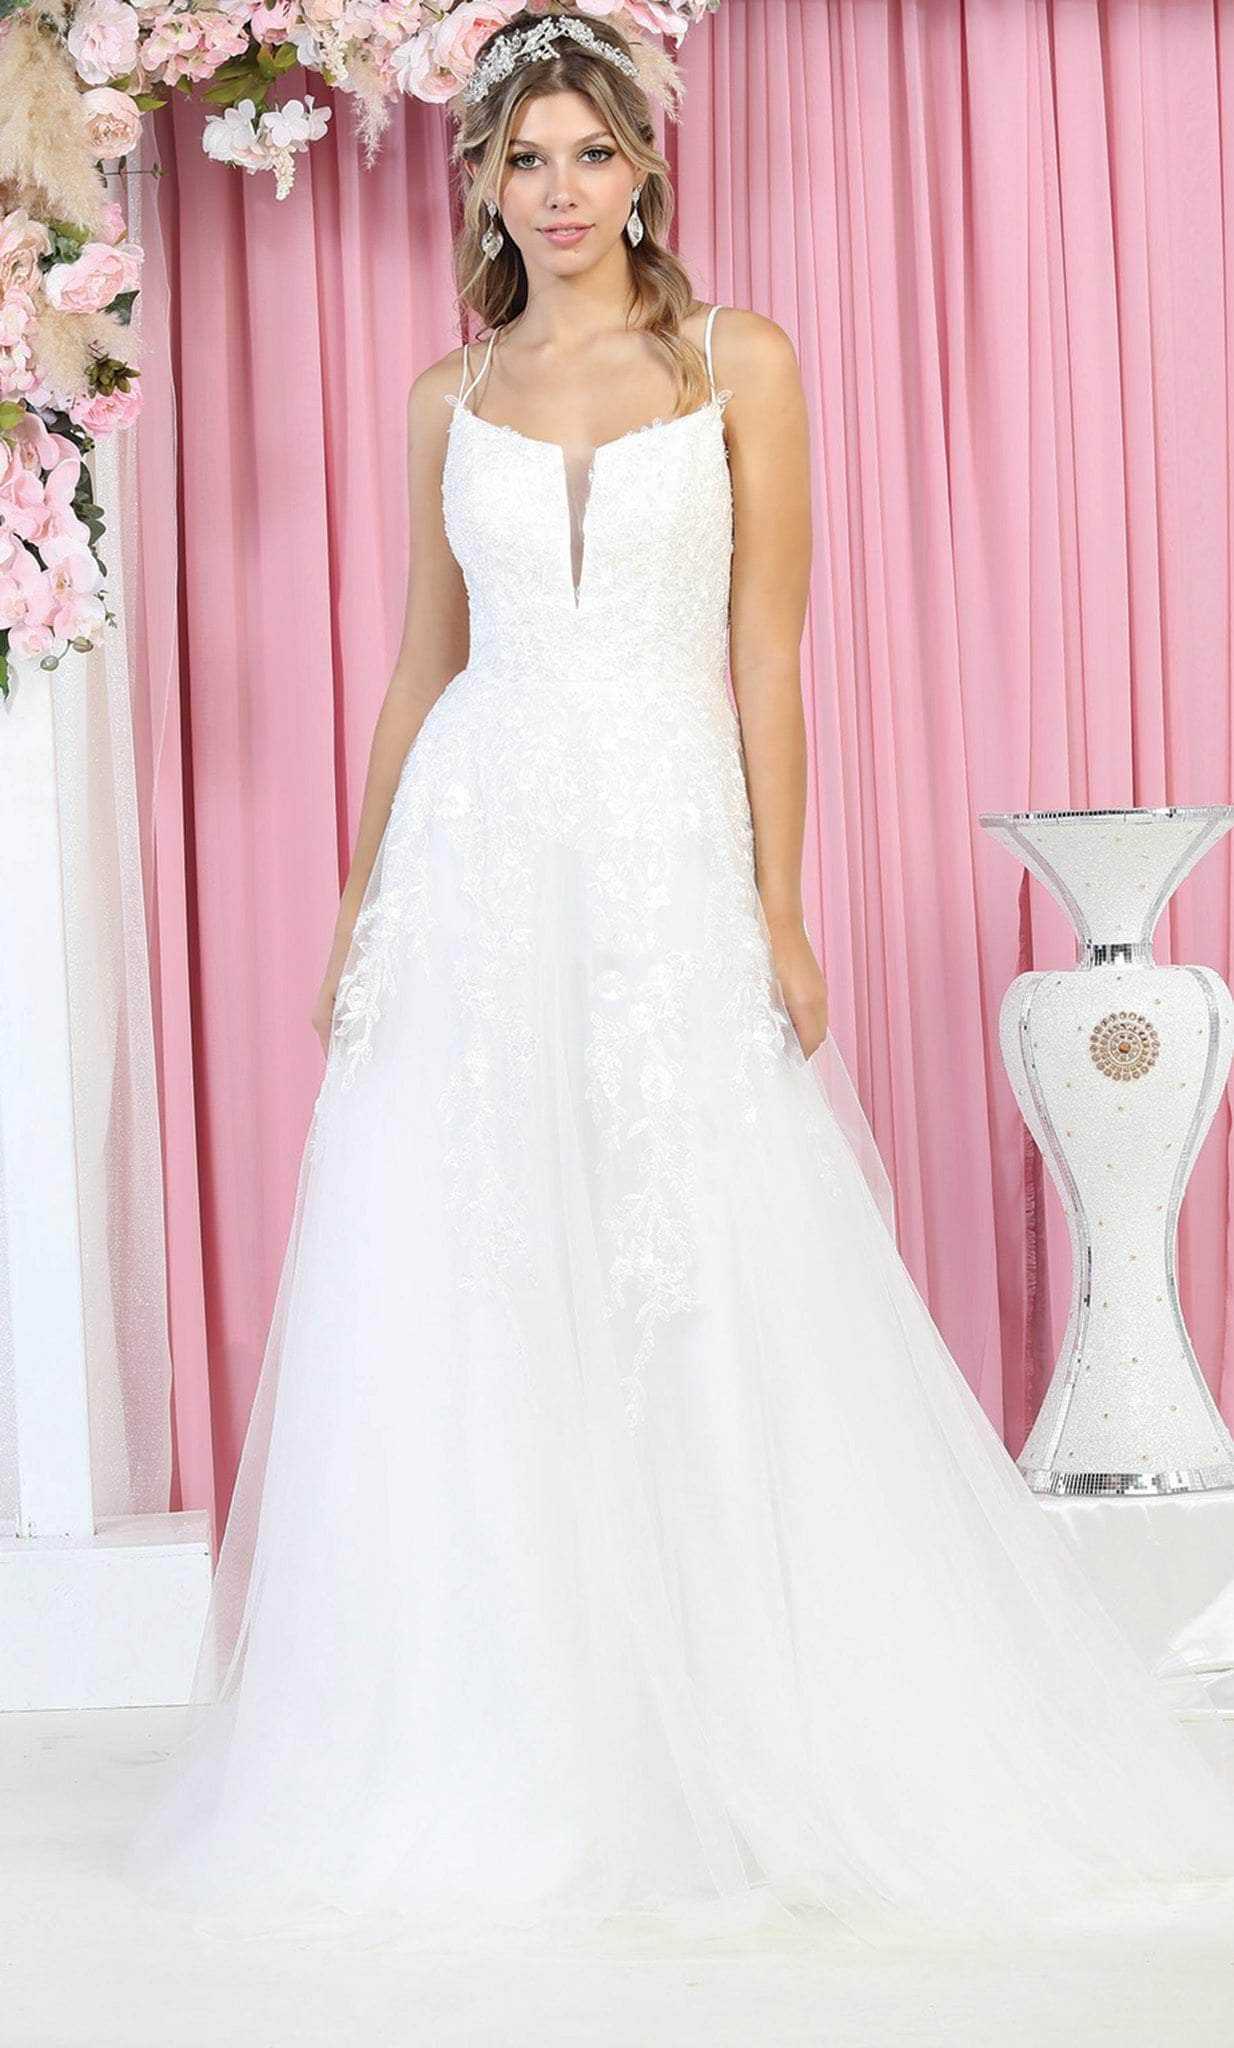 May Queen, May Queen RQ7917 - Dual Strap A-Line Wedding Gown